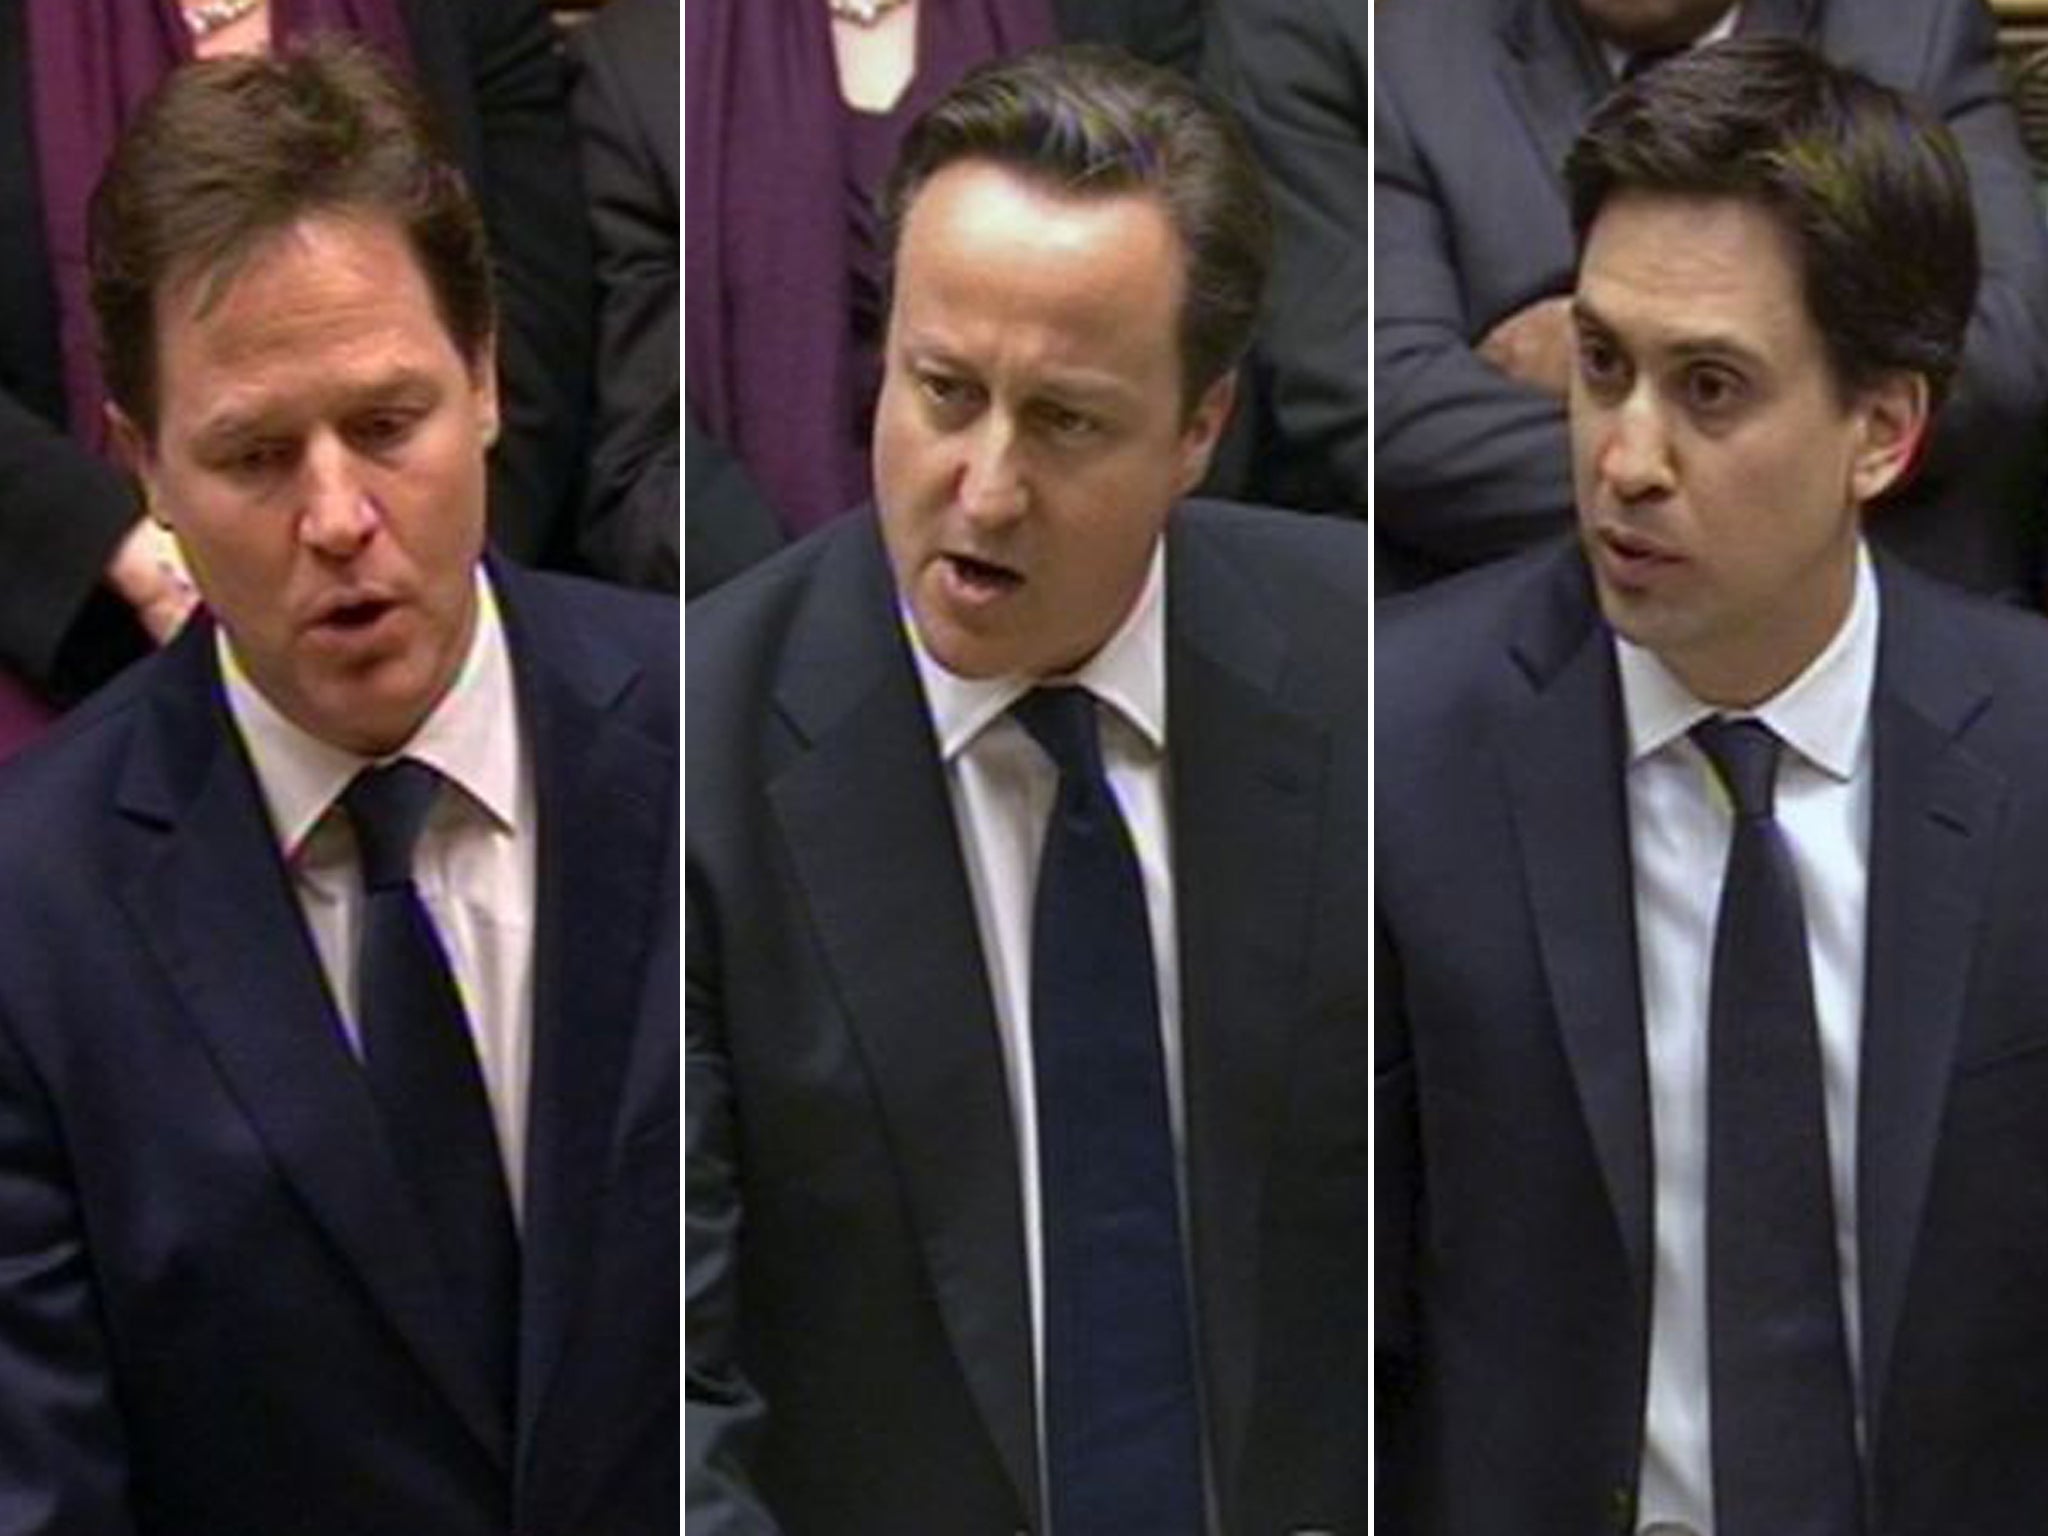 Nick Clegg, David Cameron and Ed Miliband all attended the emergency recall of Parliament